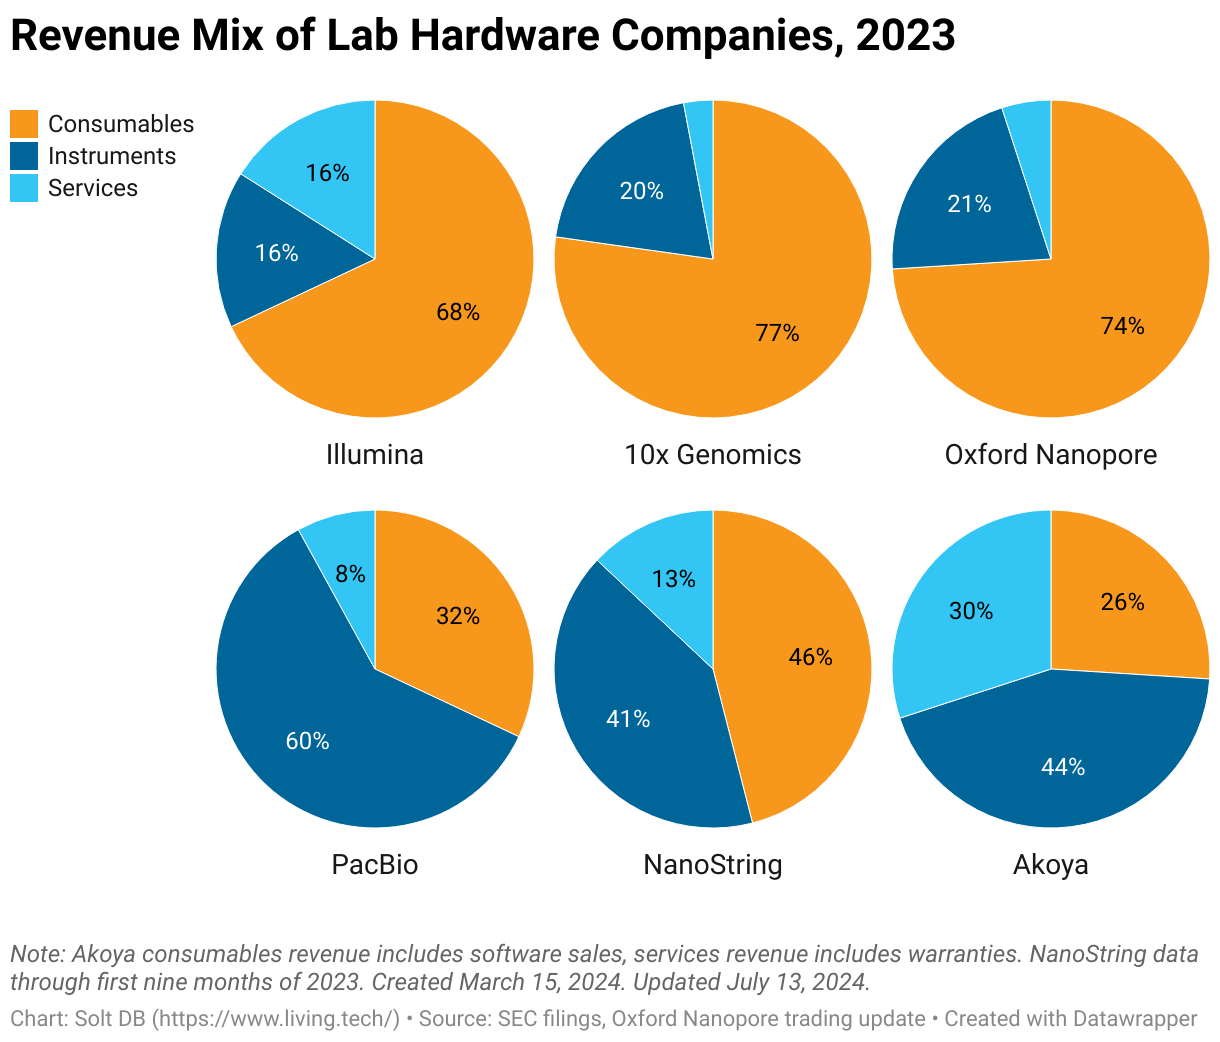 A group of six pie charts showing consumables, instruments, and services revenue for Illumina, 10x Genomics, Oxford Nanopore, PacBio, NanoString, and Akoya in 2023.